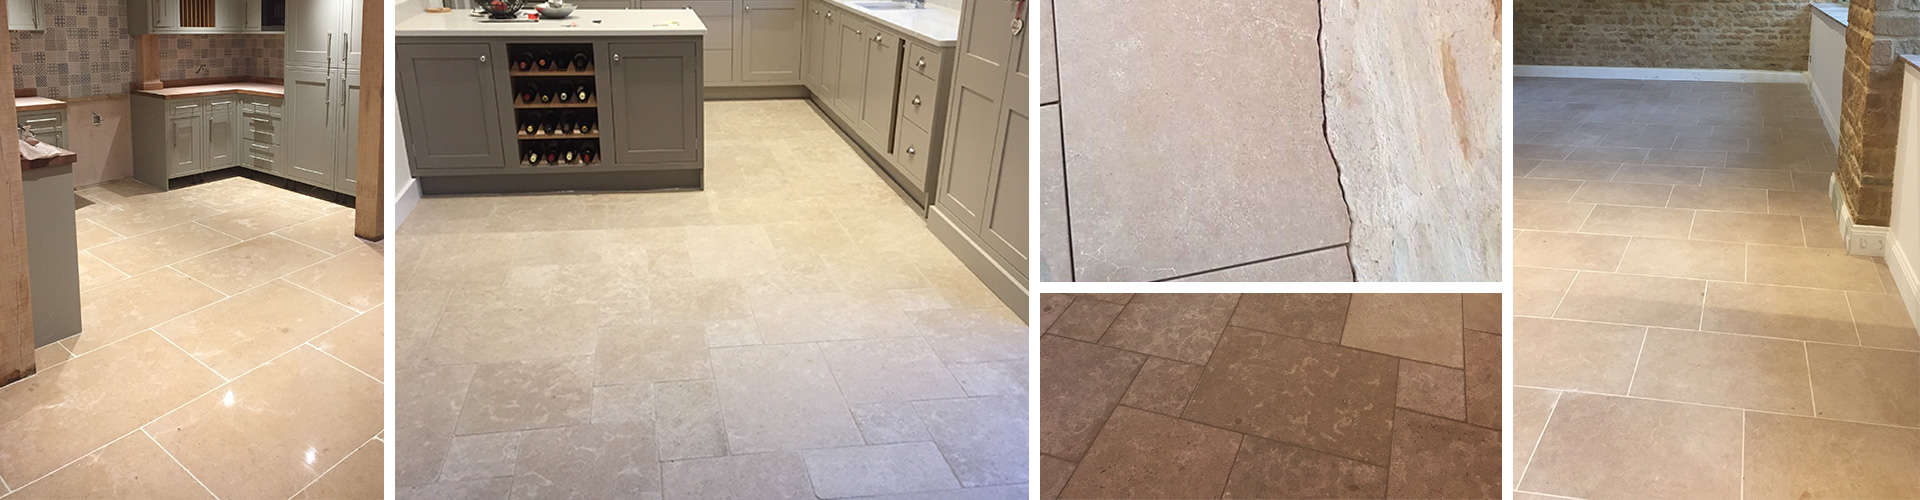 Natural stone floors Oxford